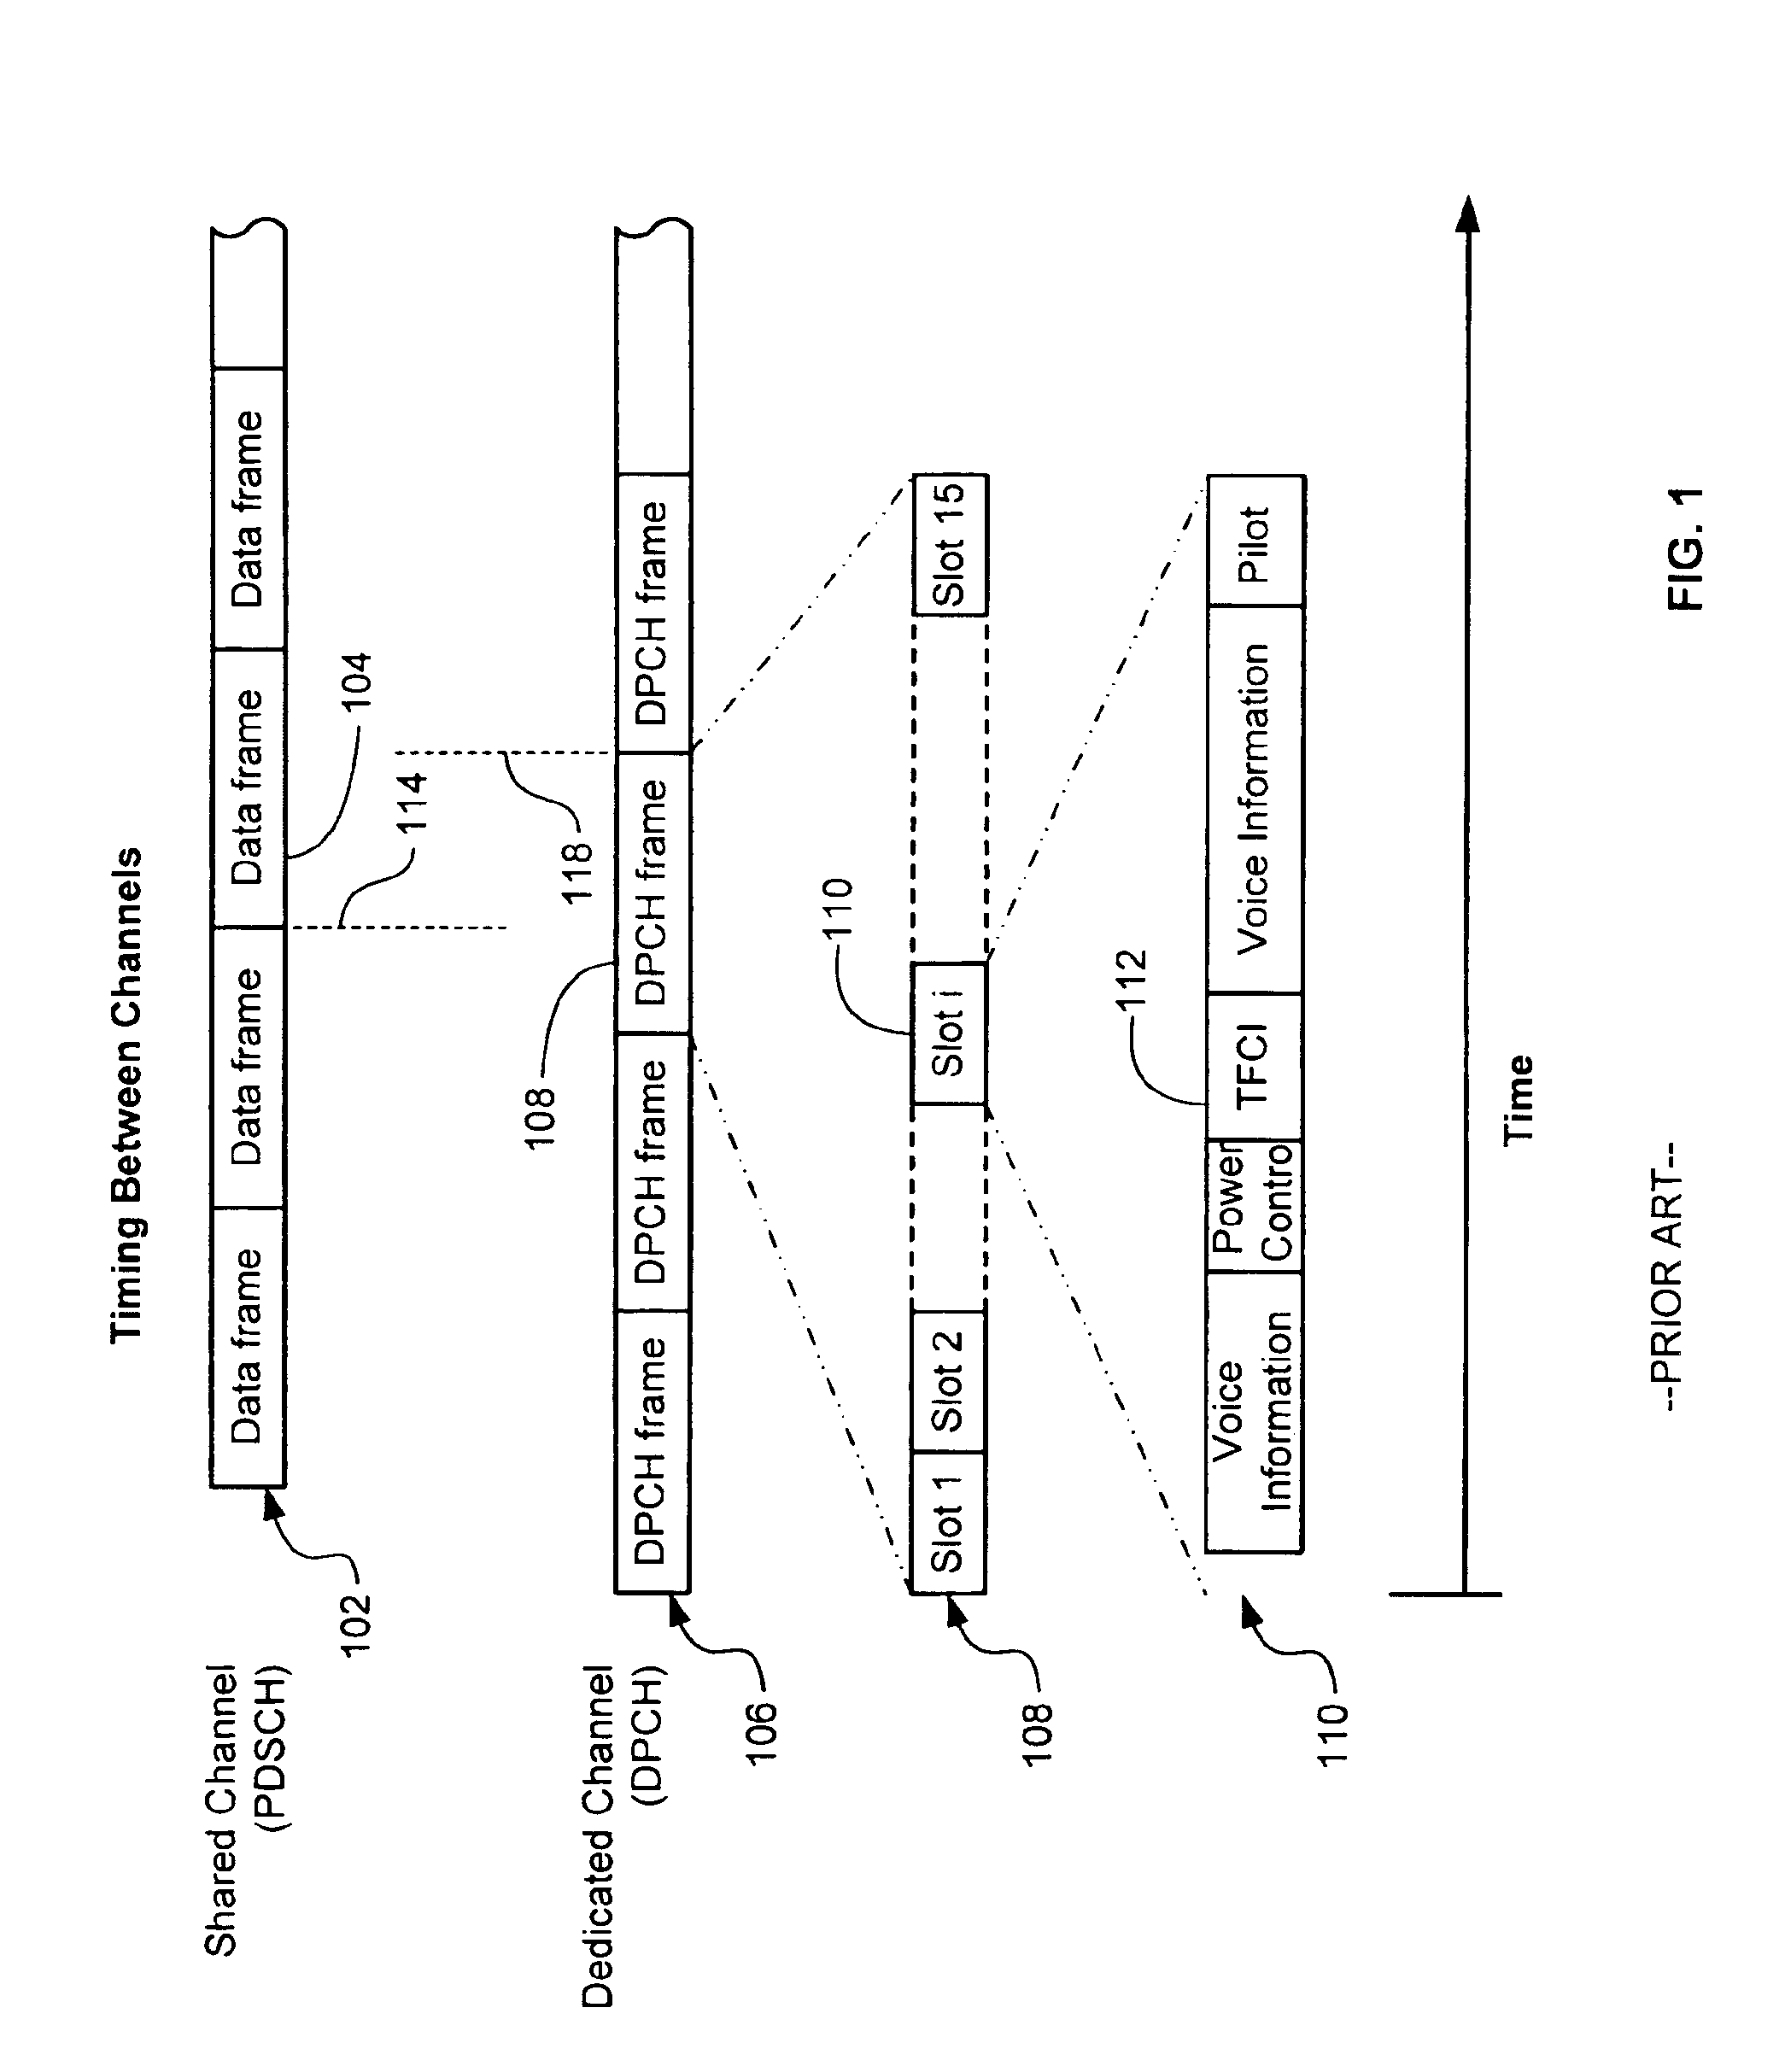 Method and system for data and voice transmission over shared and dedicated channels